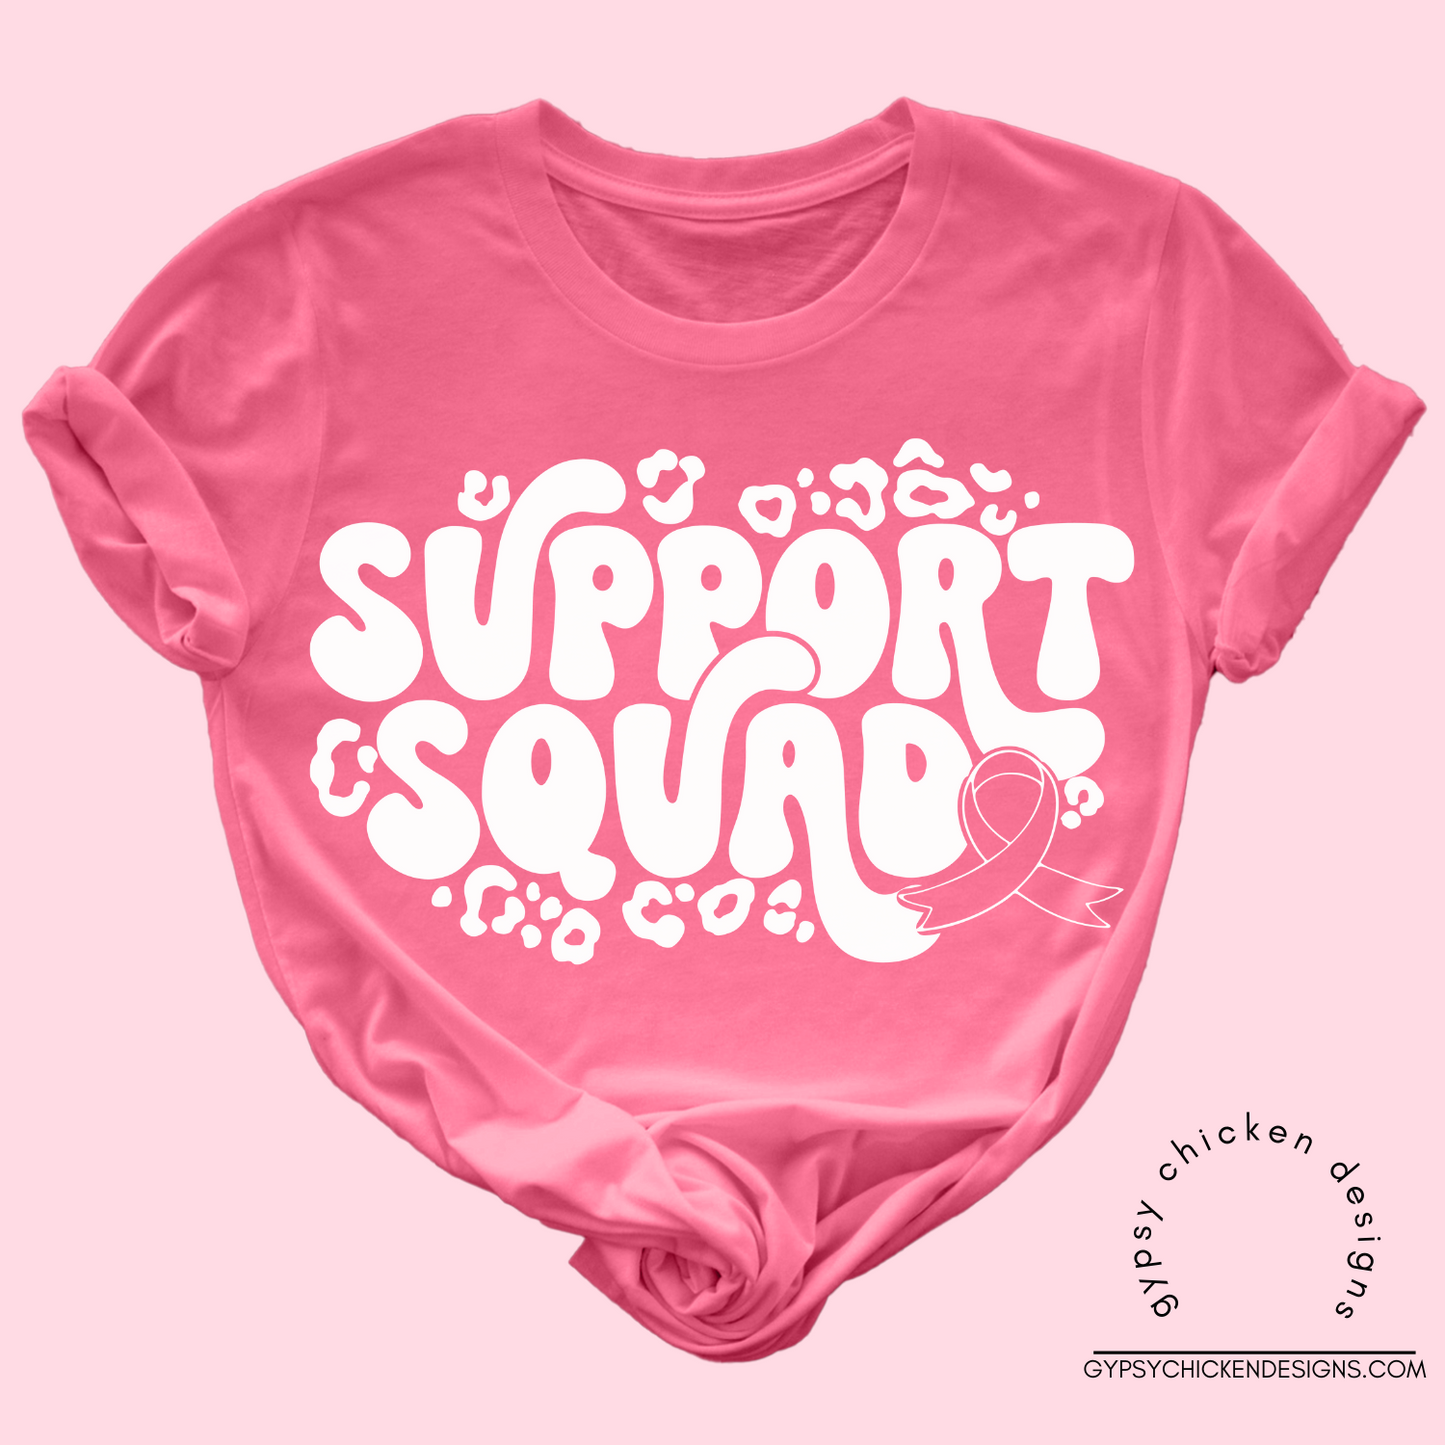 Support Squad